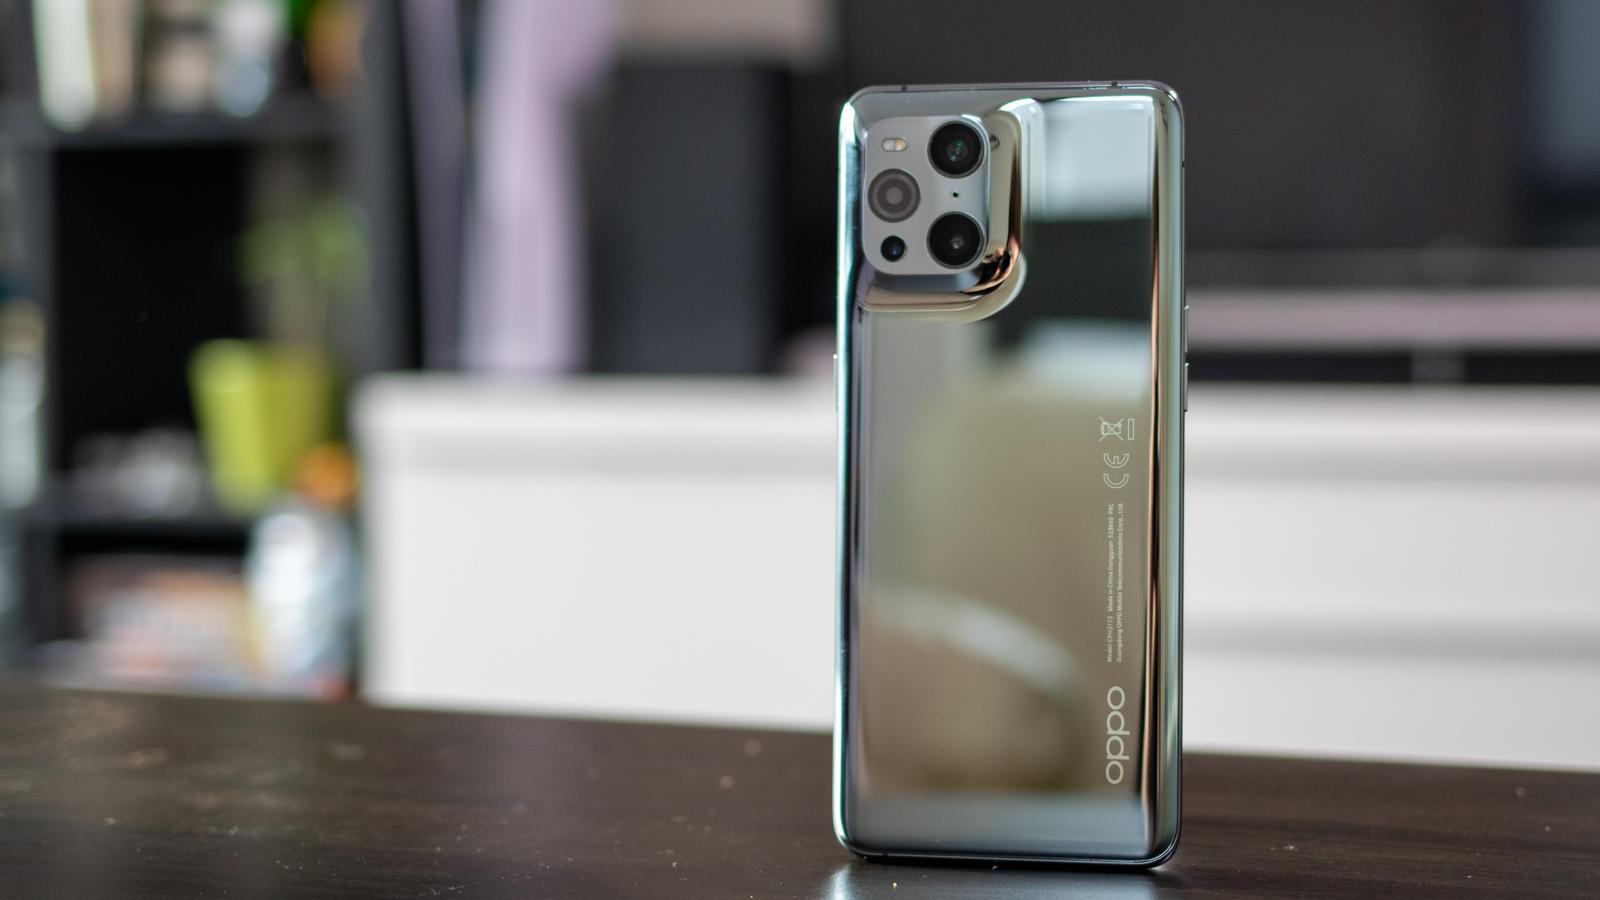 Oppo Encuentra X3 Pro